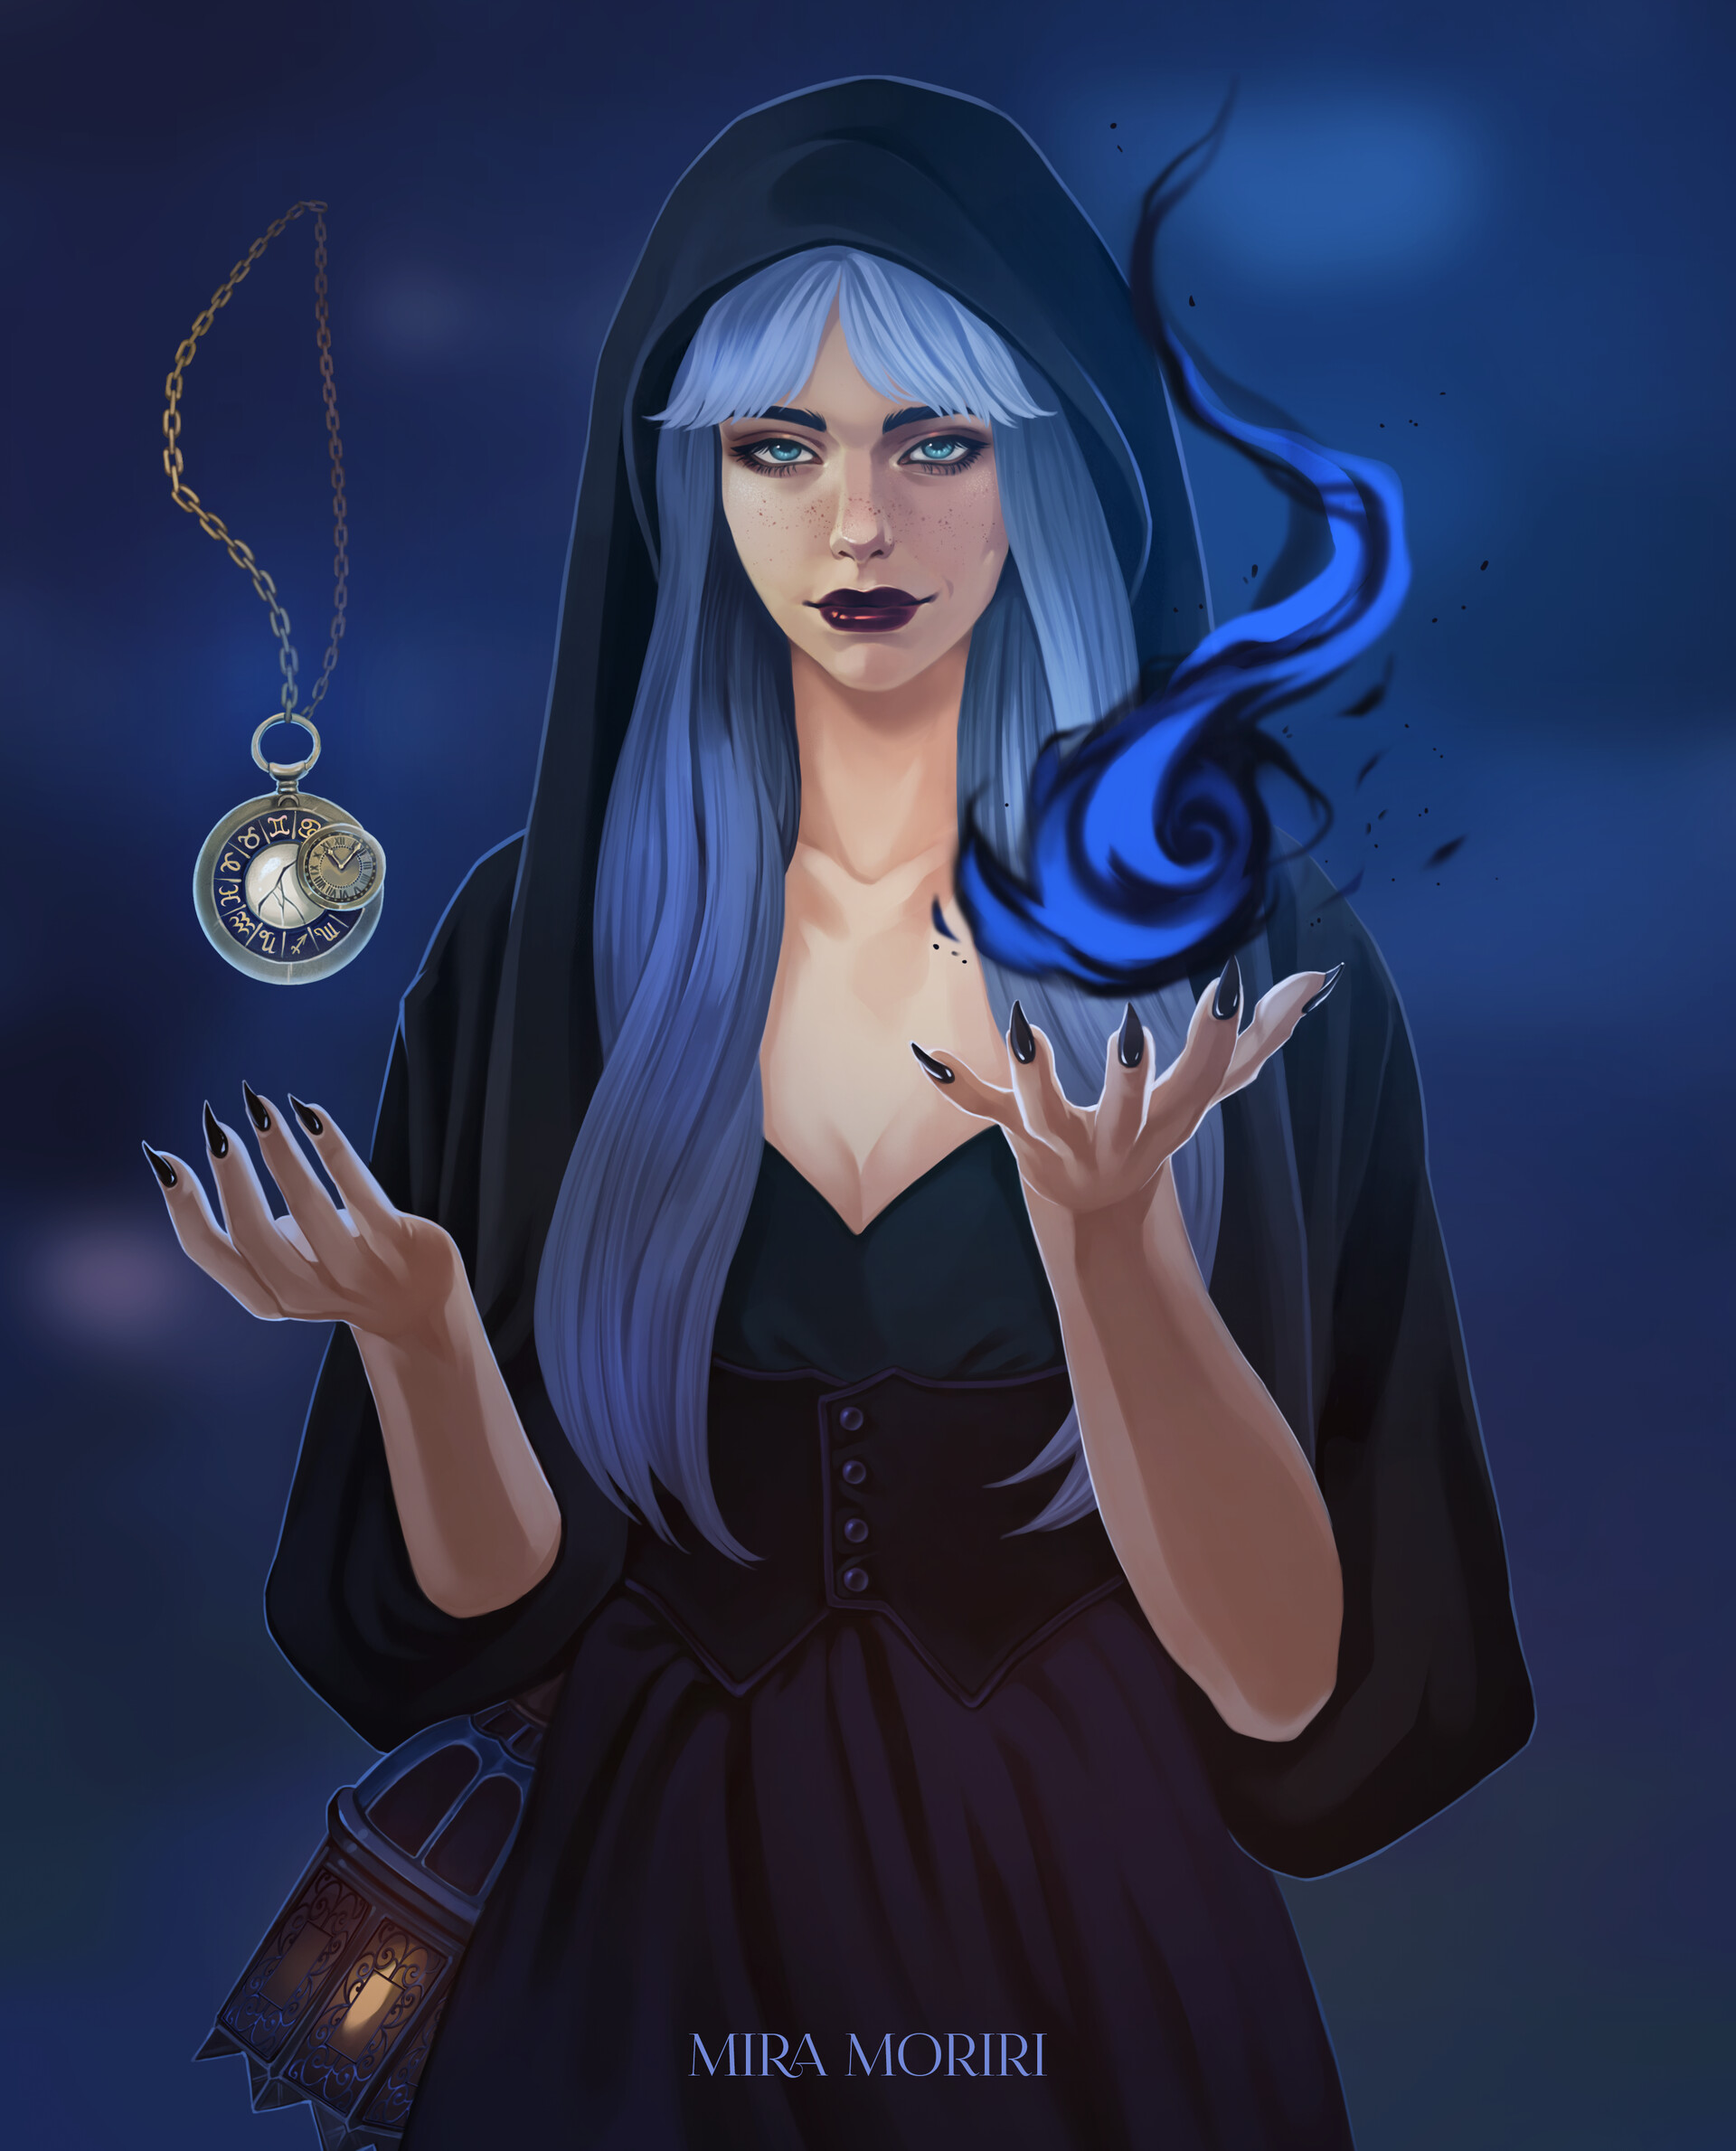 ArtStation - Time traveling witch